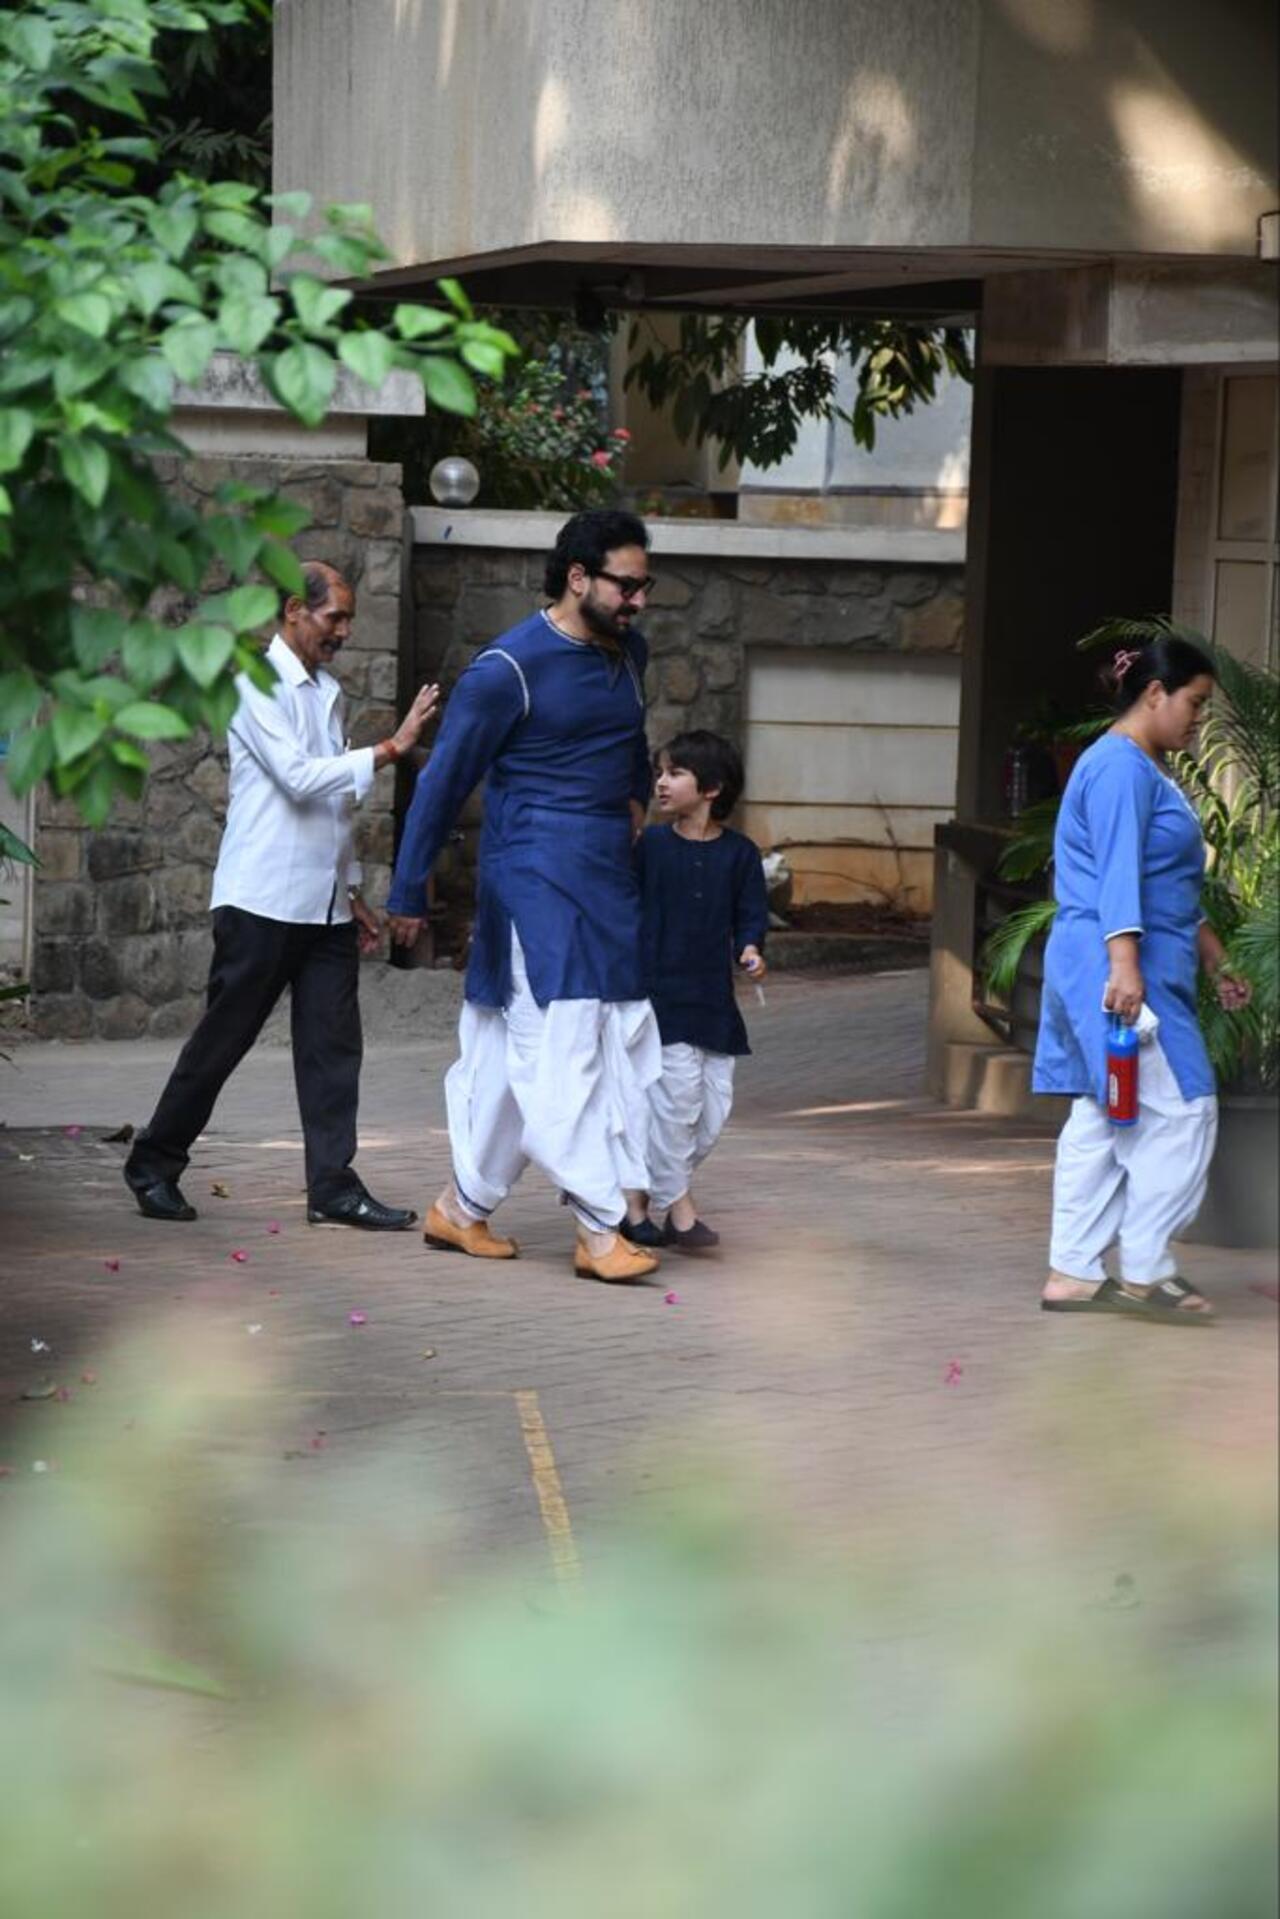 Saif Ali Khan looked dapper in a blue kurta and white dhoti. His kids also wore traditional wear of the same colour for Diwali puja